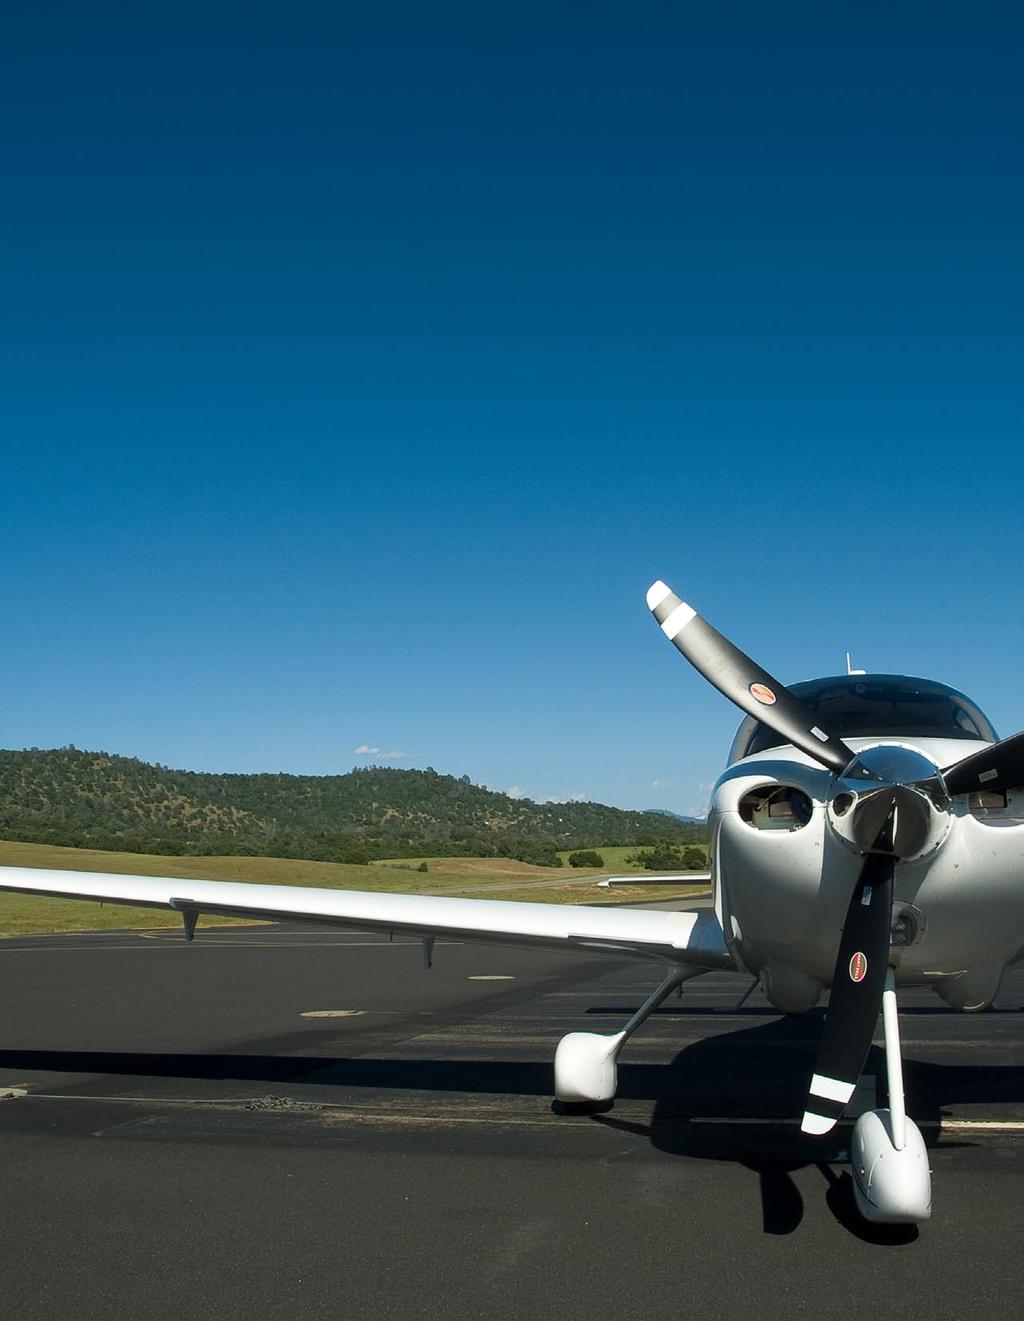 Our credentials speak for themselves and they include training at the levels of Part 141 approved Private, Instrument, Commercial, Special Preparation Course for King Air C-90, and Private